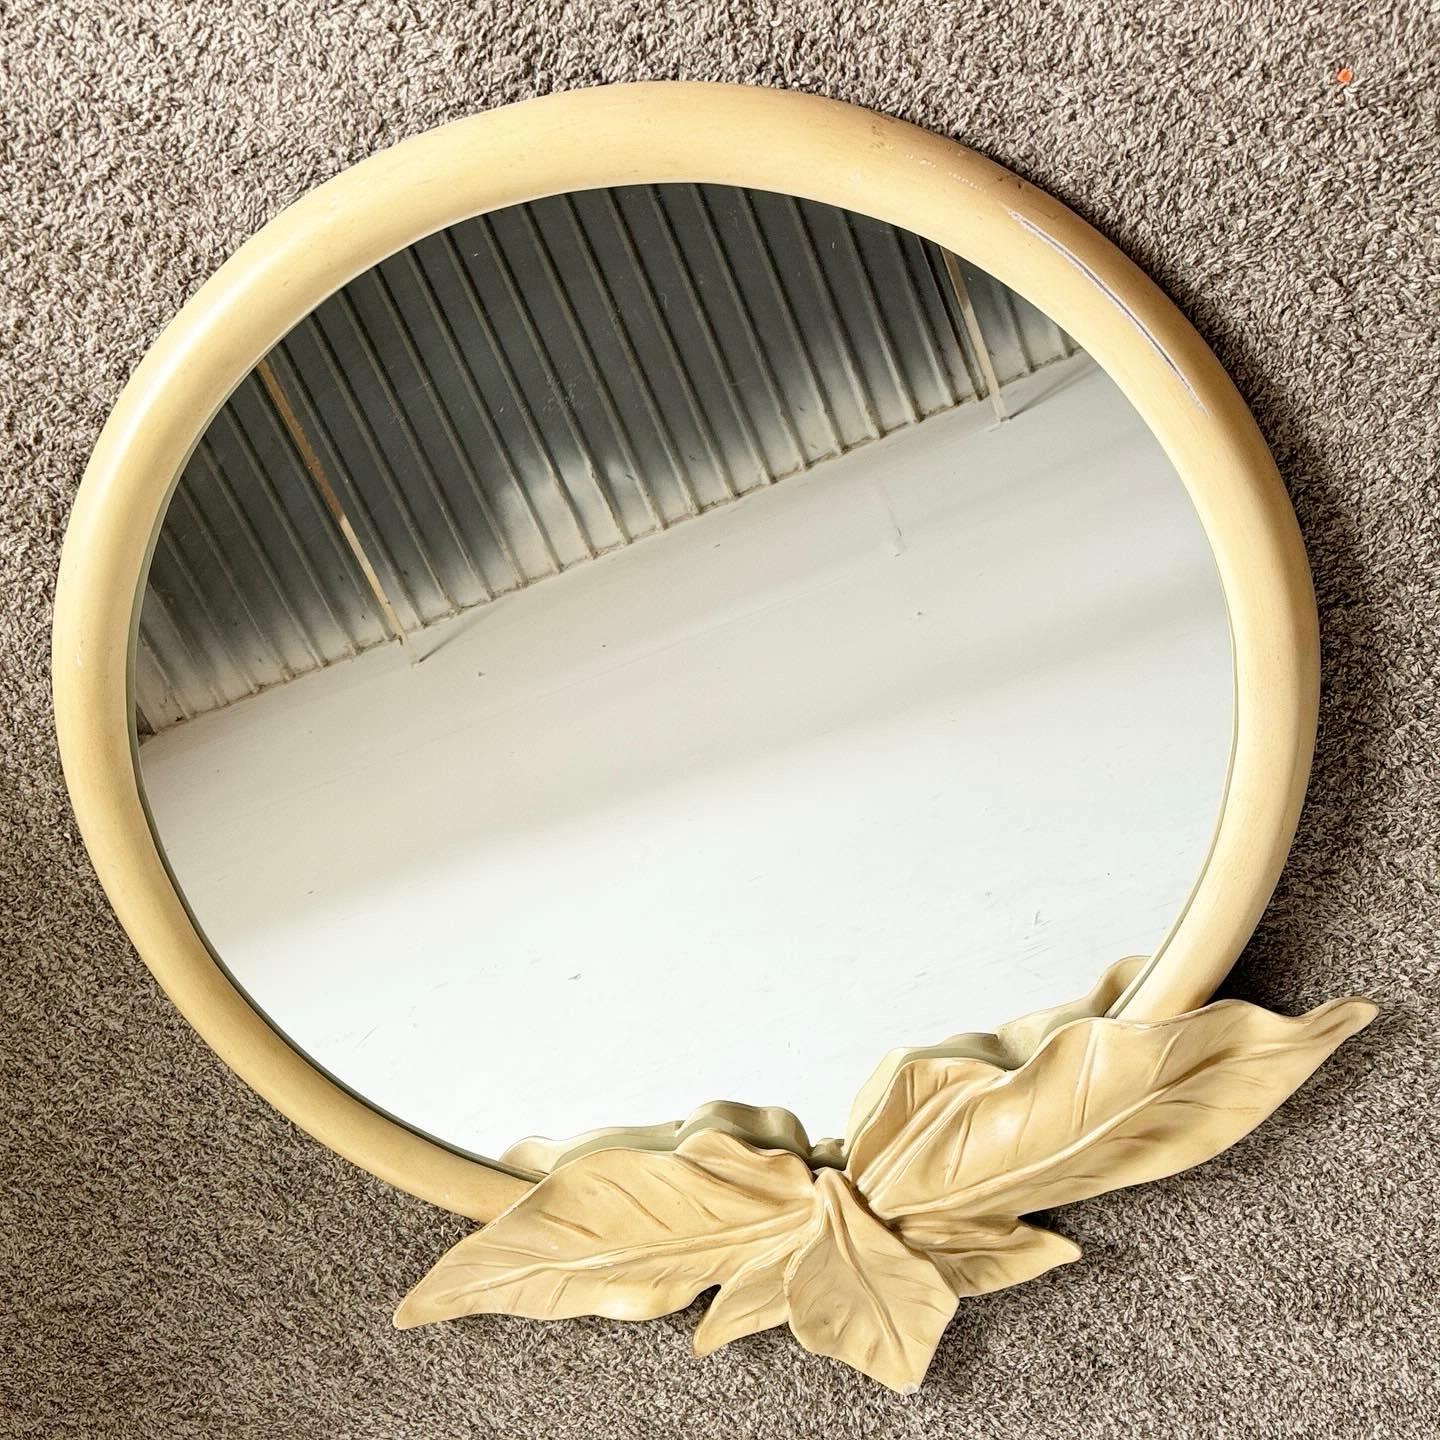 Discover the elegance of this Vintage Regency Palm Leaf Wall Mirror, attributed to Serge Roche. Its intricately designed frame and gold-tone finish add sophistication to any space.